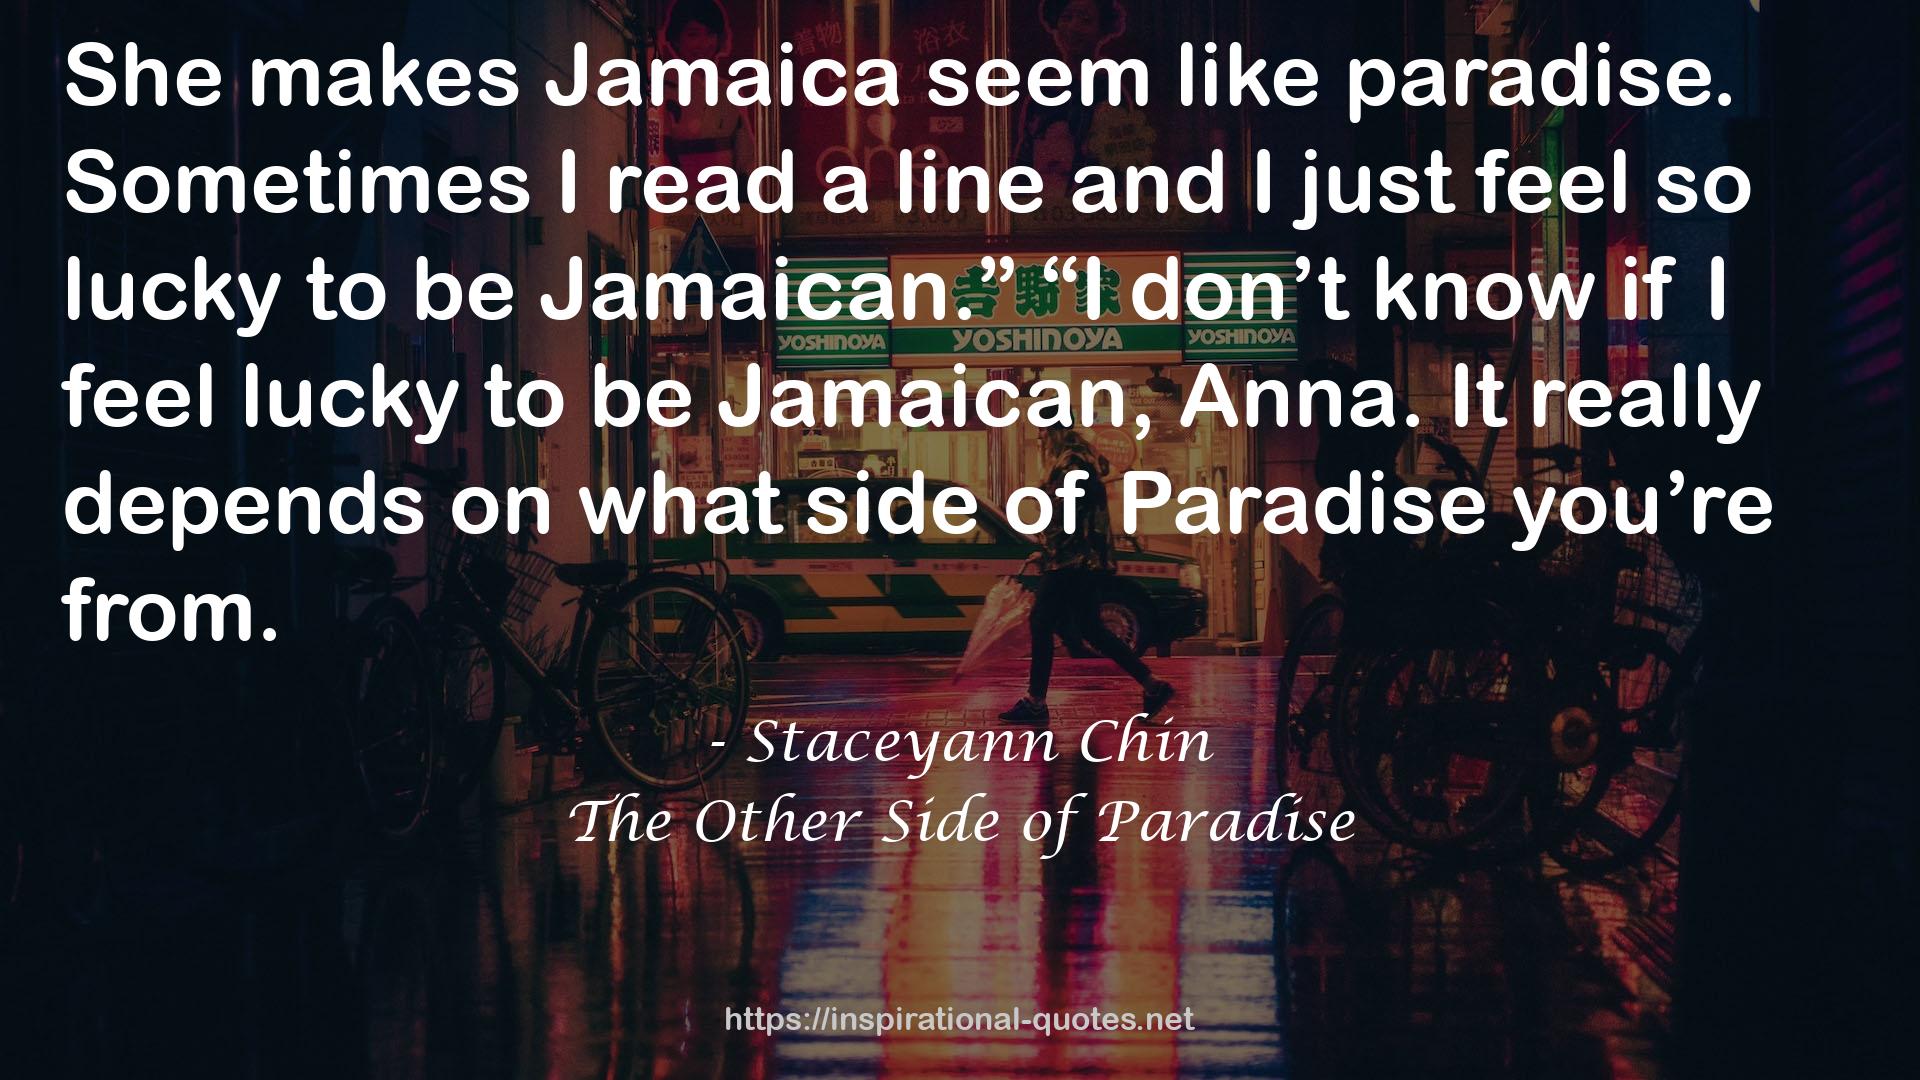 The Other Side of Paradise QUOTES